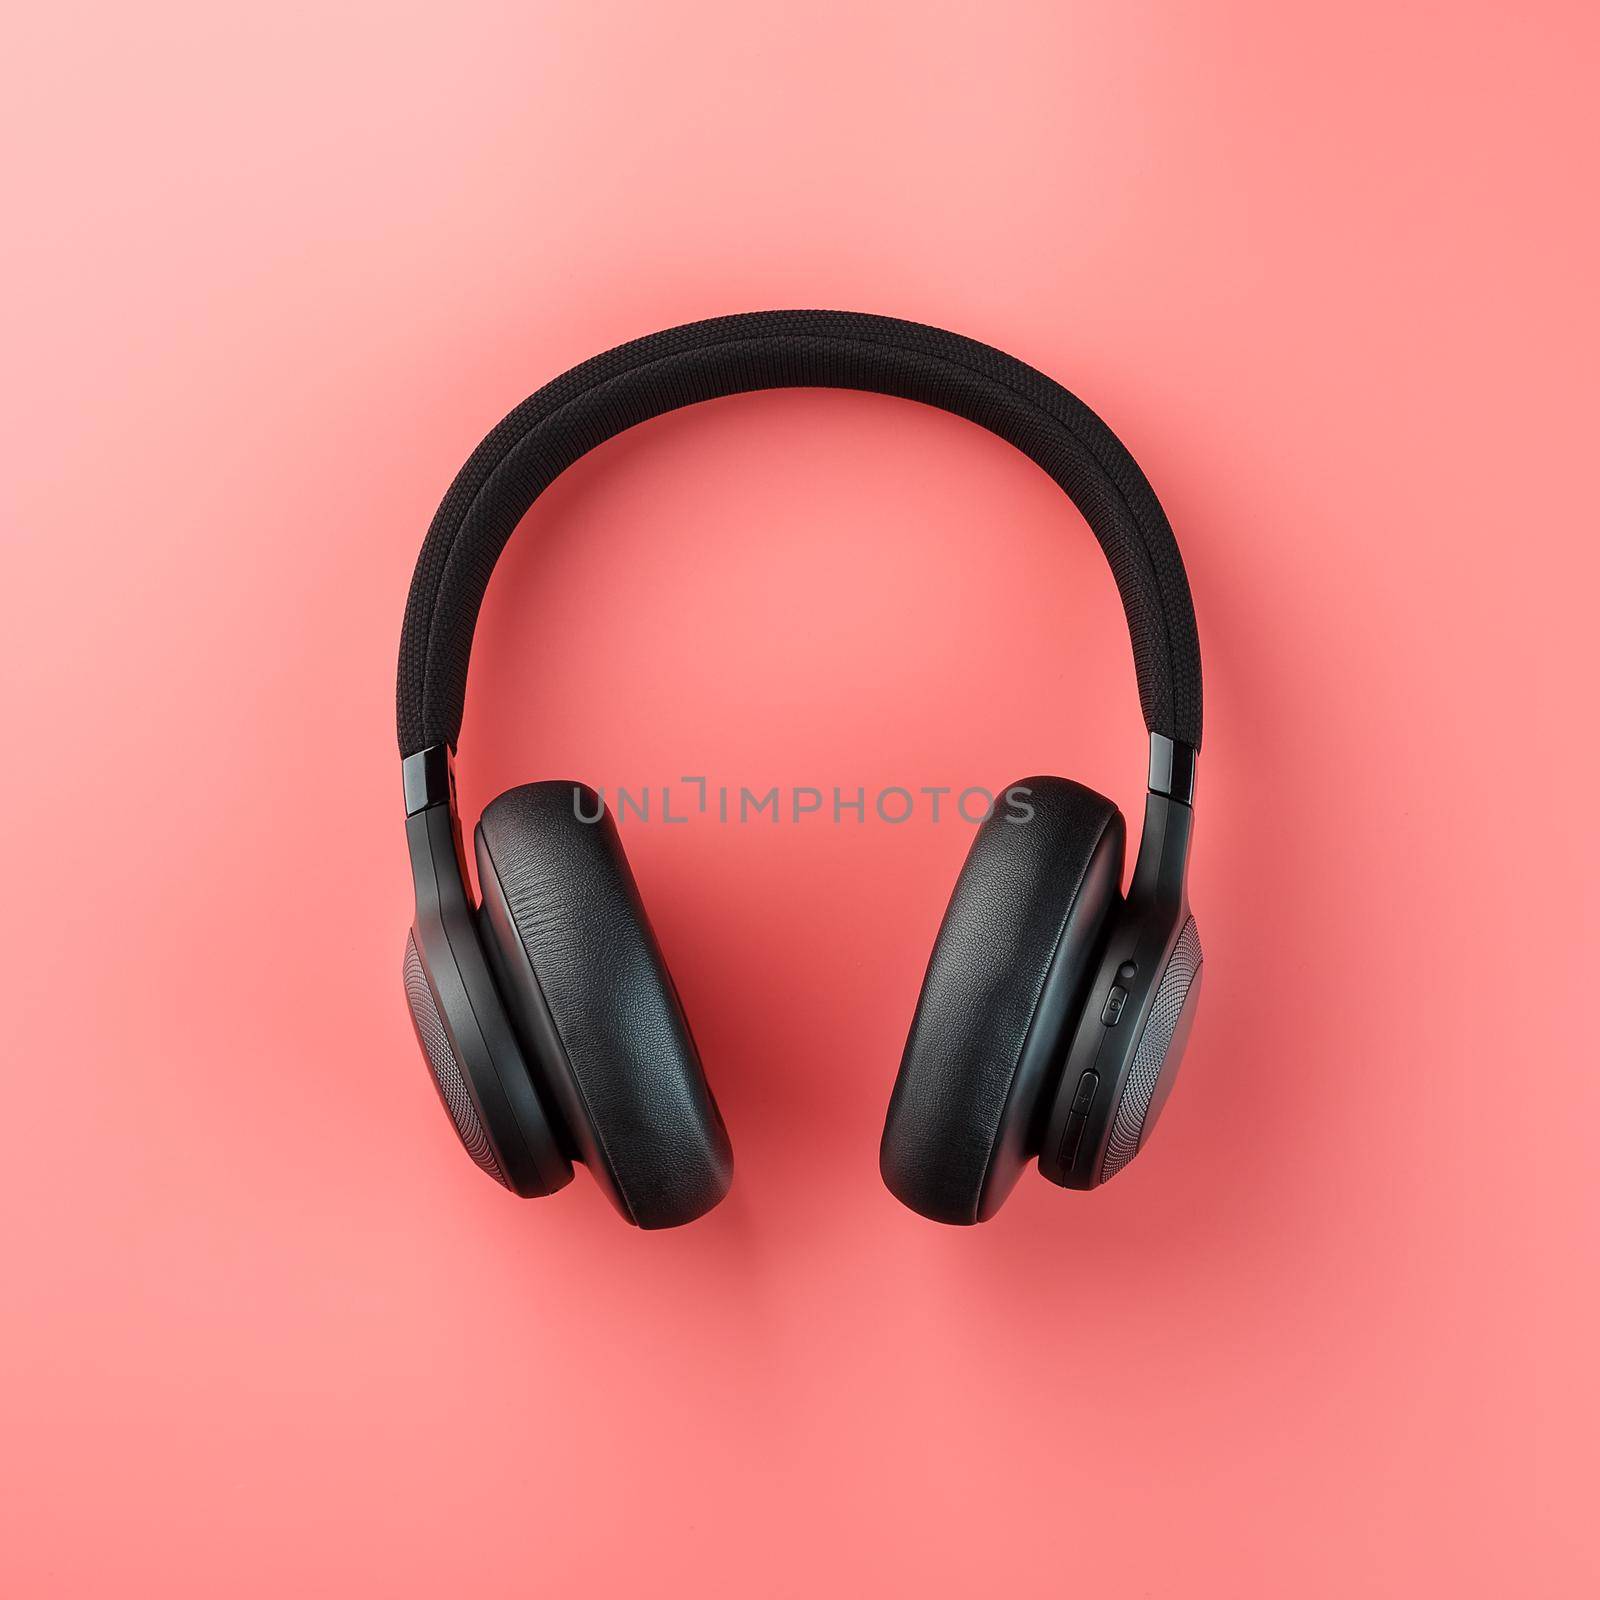 Wireless black headphones on a pink background. View from above. In-ear headphones for playing games and listening to music tracks. by AlexGrec